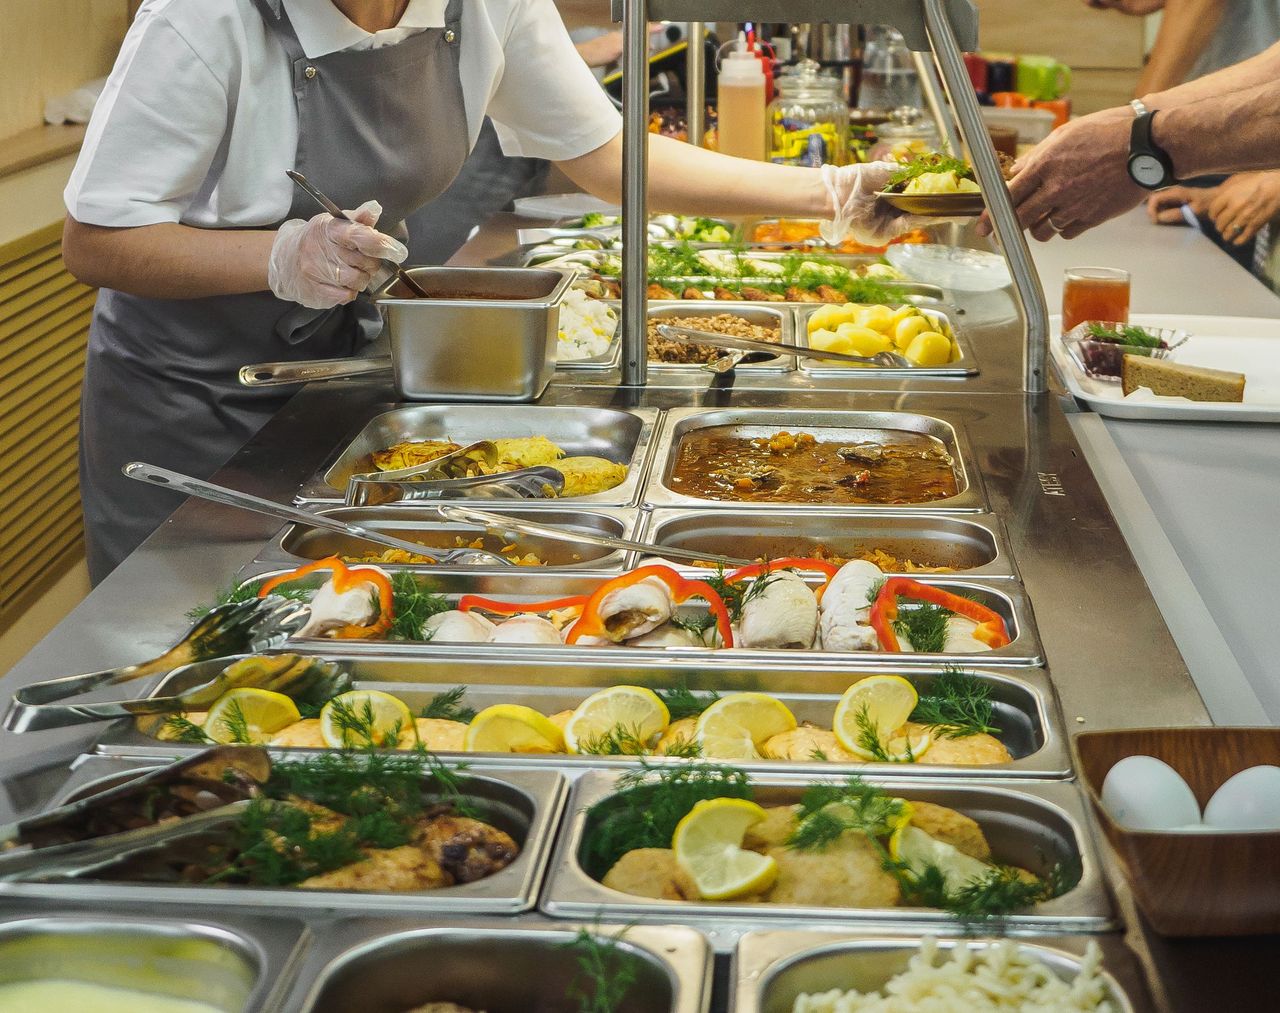 Cuisine cafeteria buffet with food. Self-service food display sh